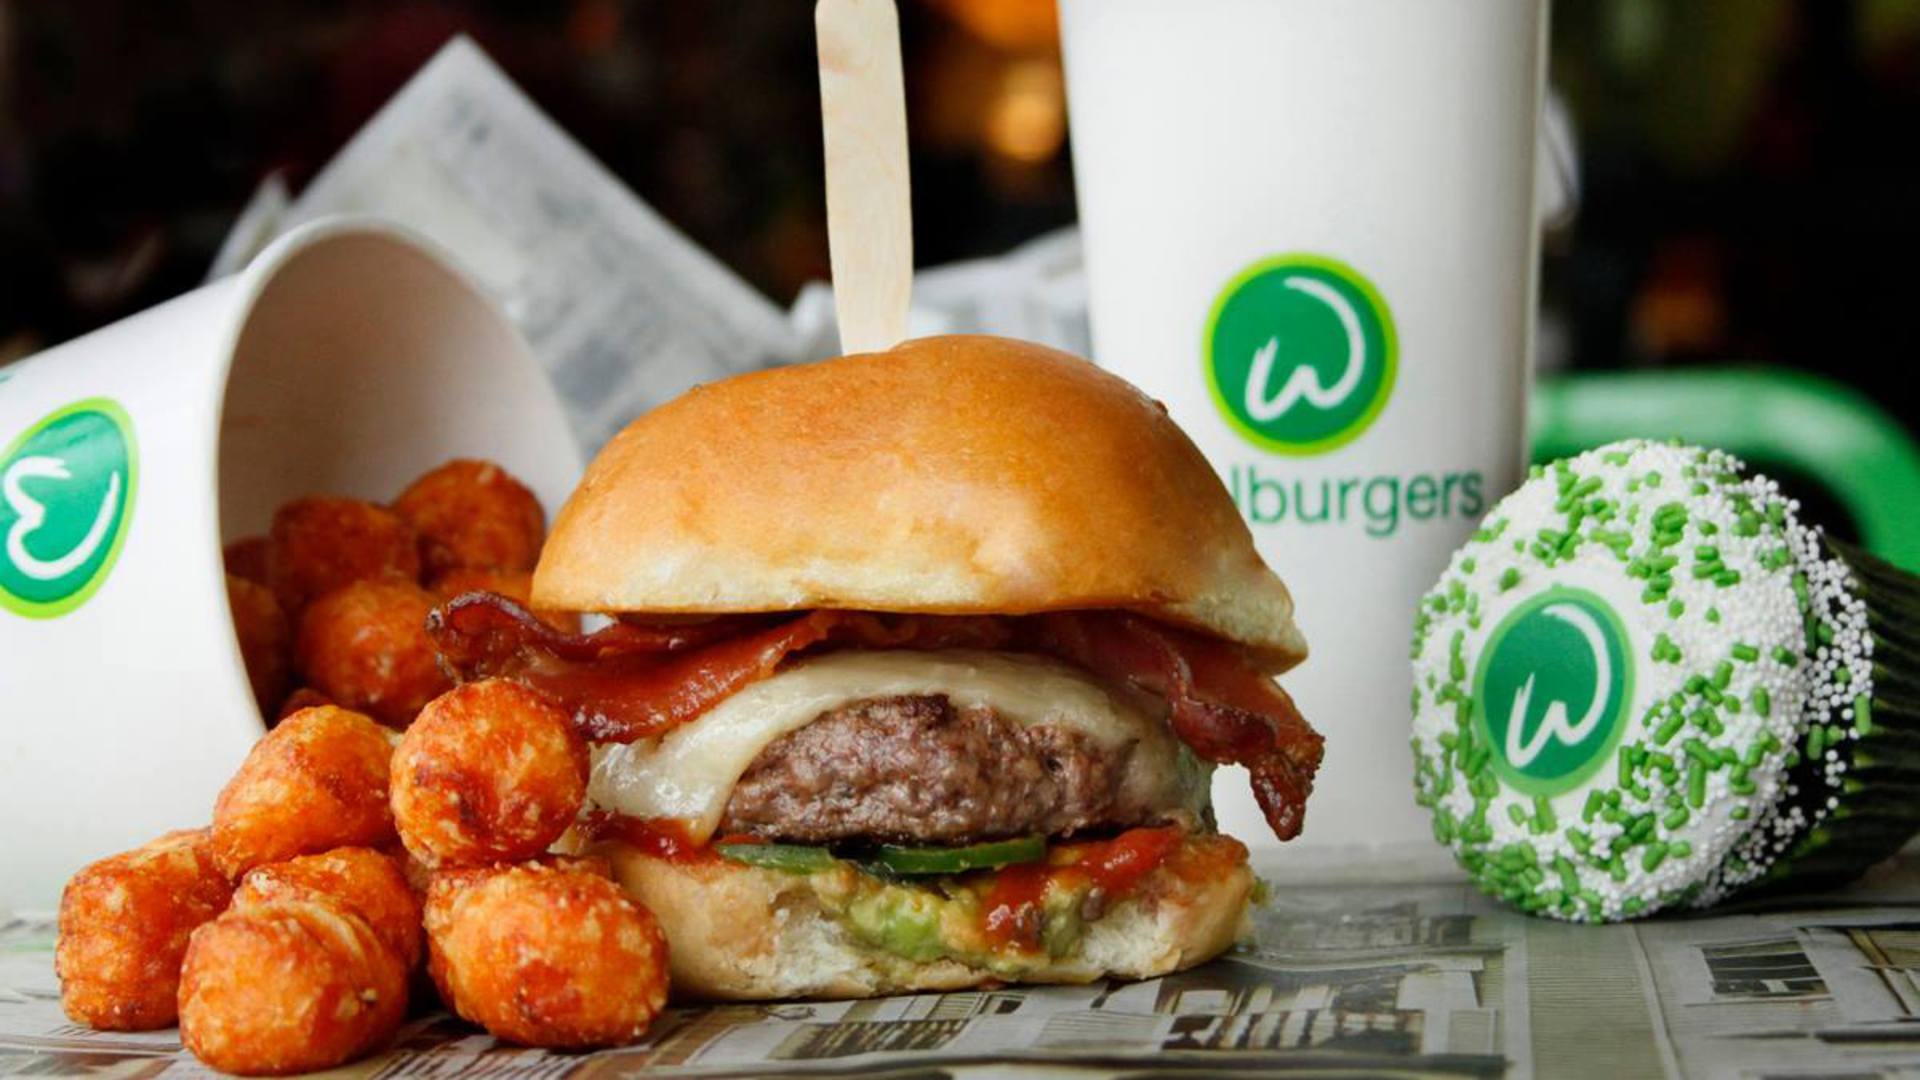 20-wahlburger-nutrition-facts